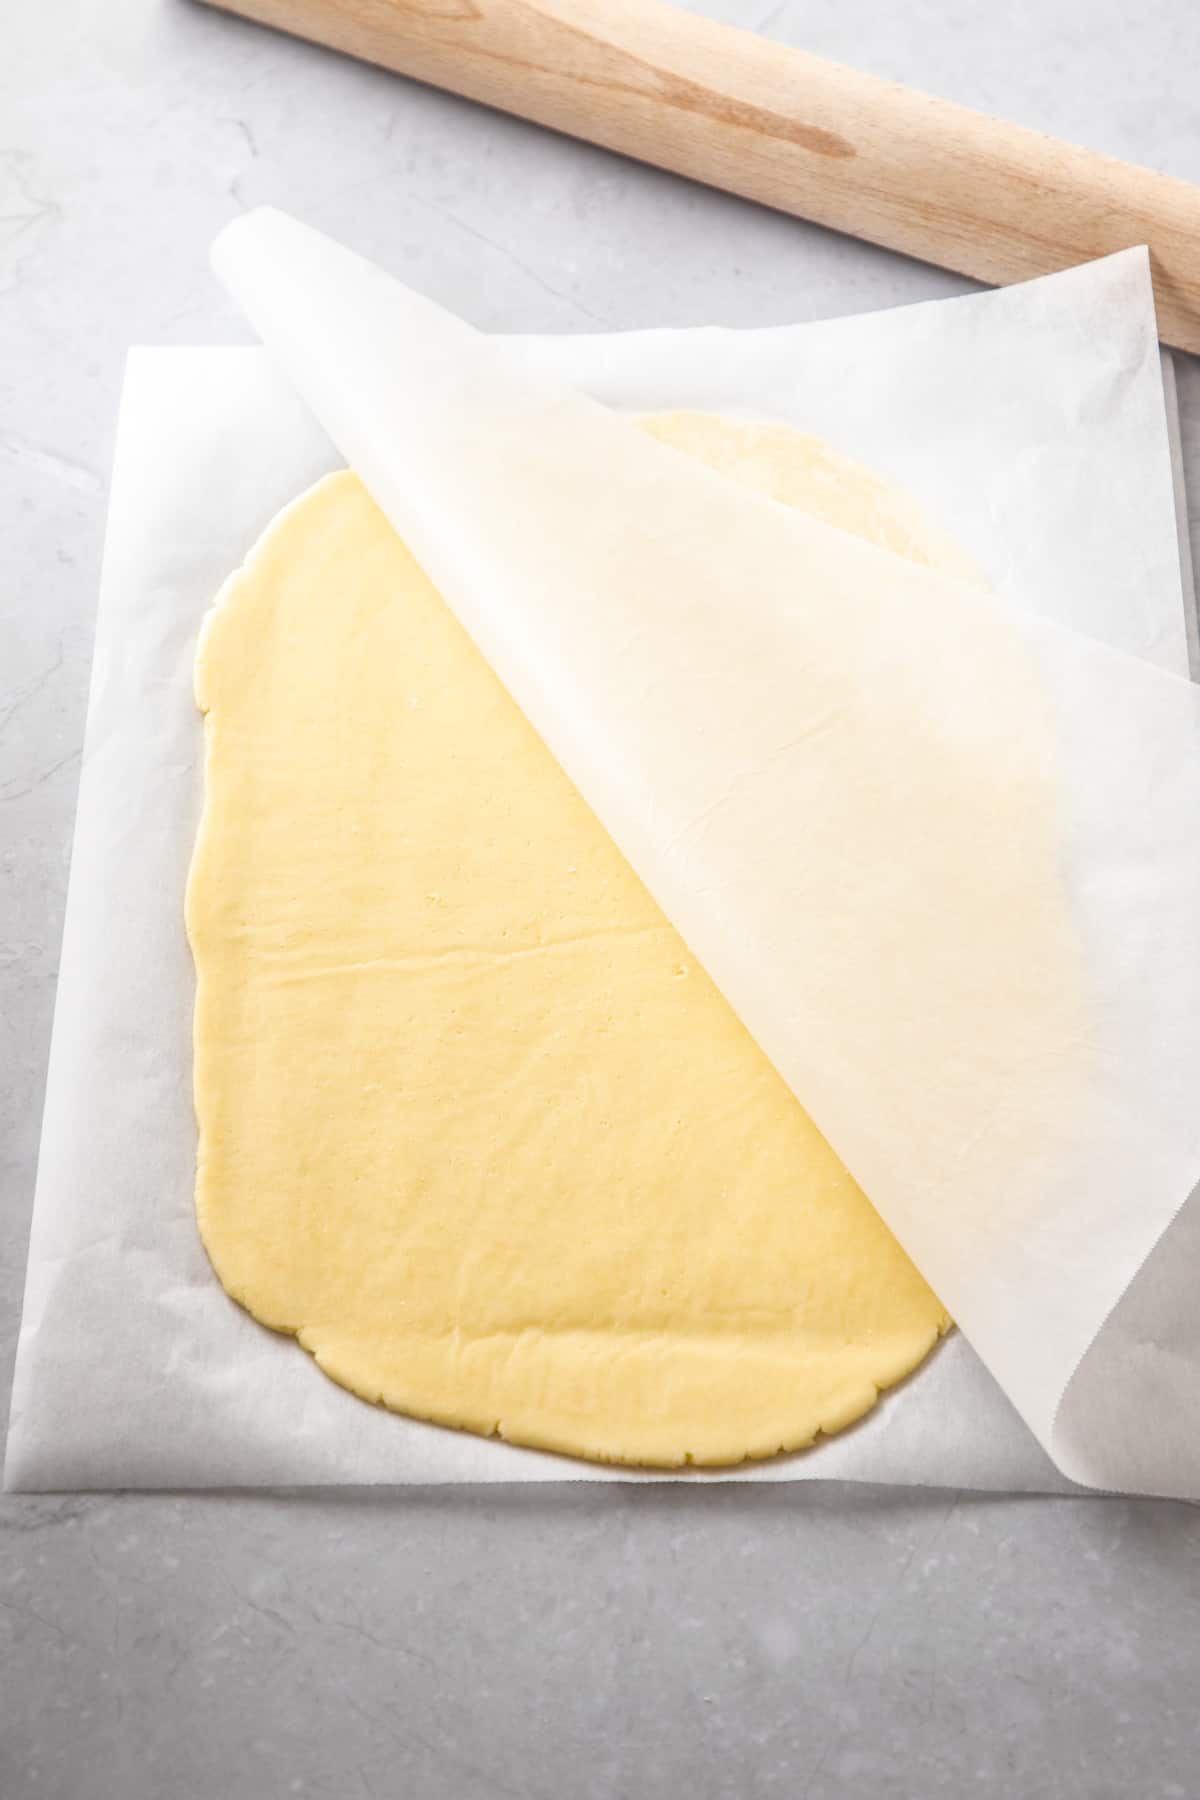 Rolled pastry, between two sheets of baking paper, with a rolling pin alongside.